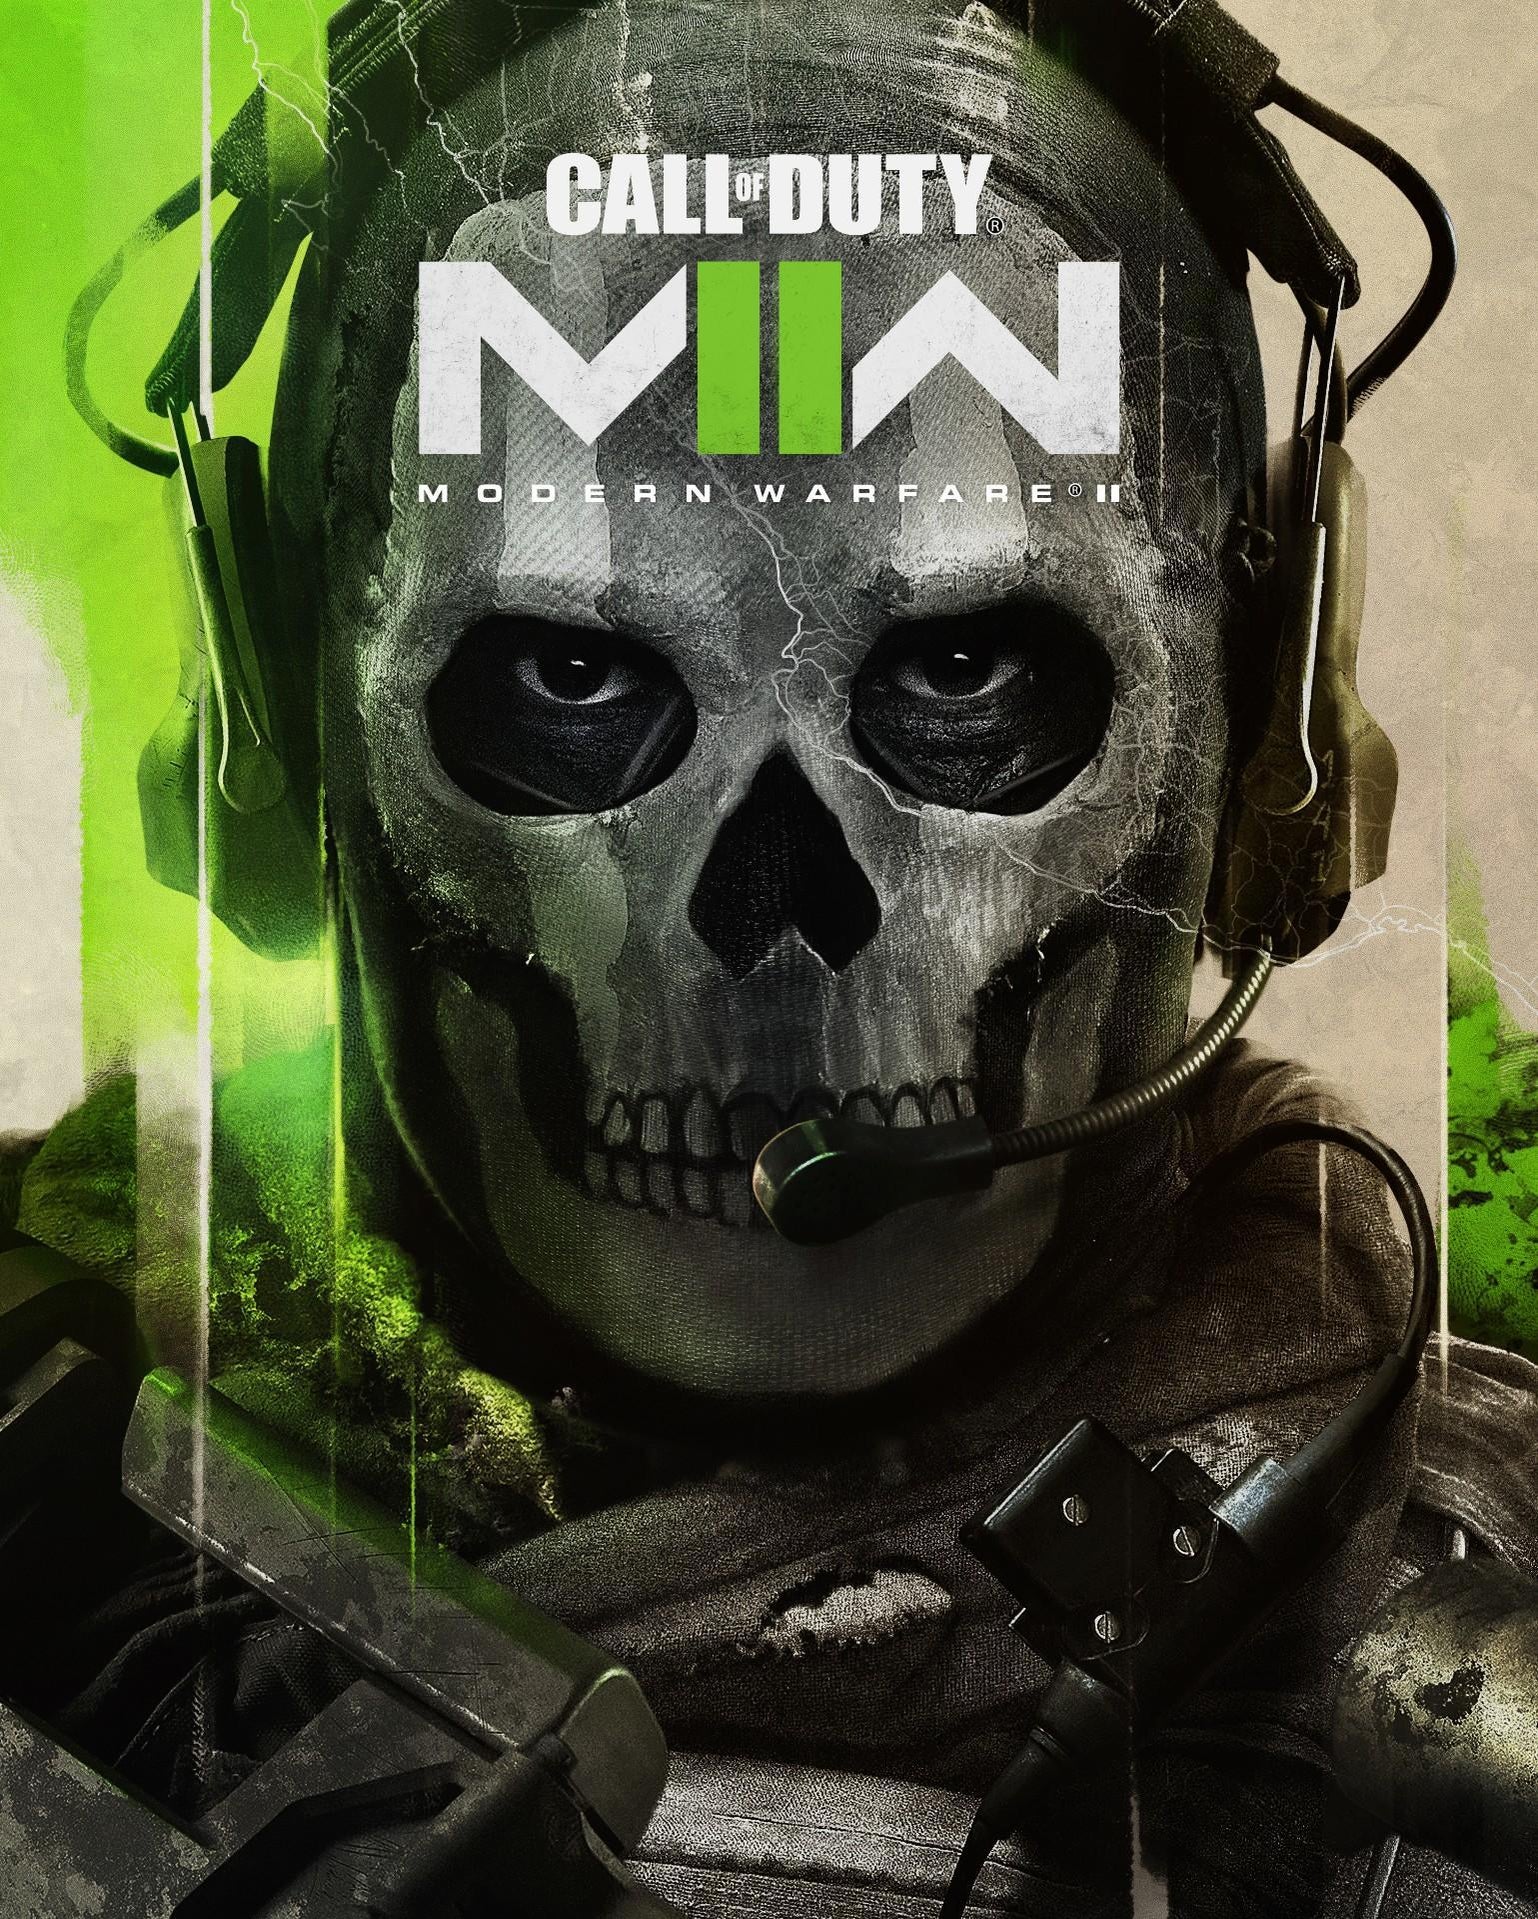 call-of-duty-modern-warfare-2-artwork-reveals-soap-and-a-new-character